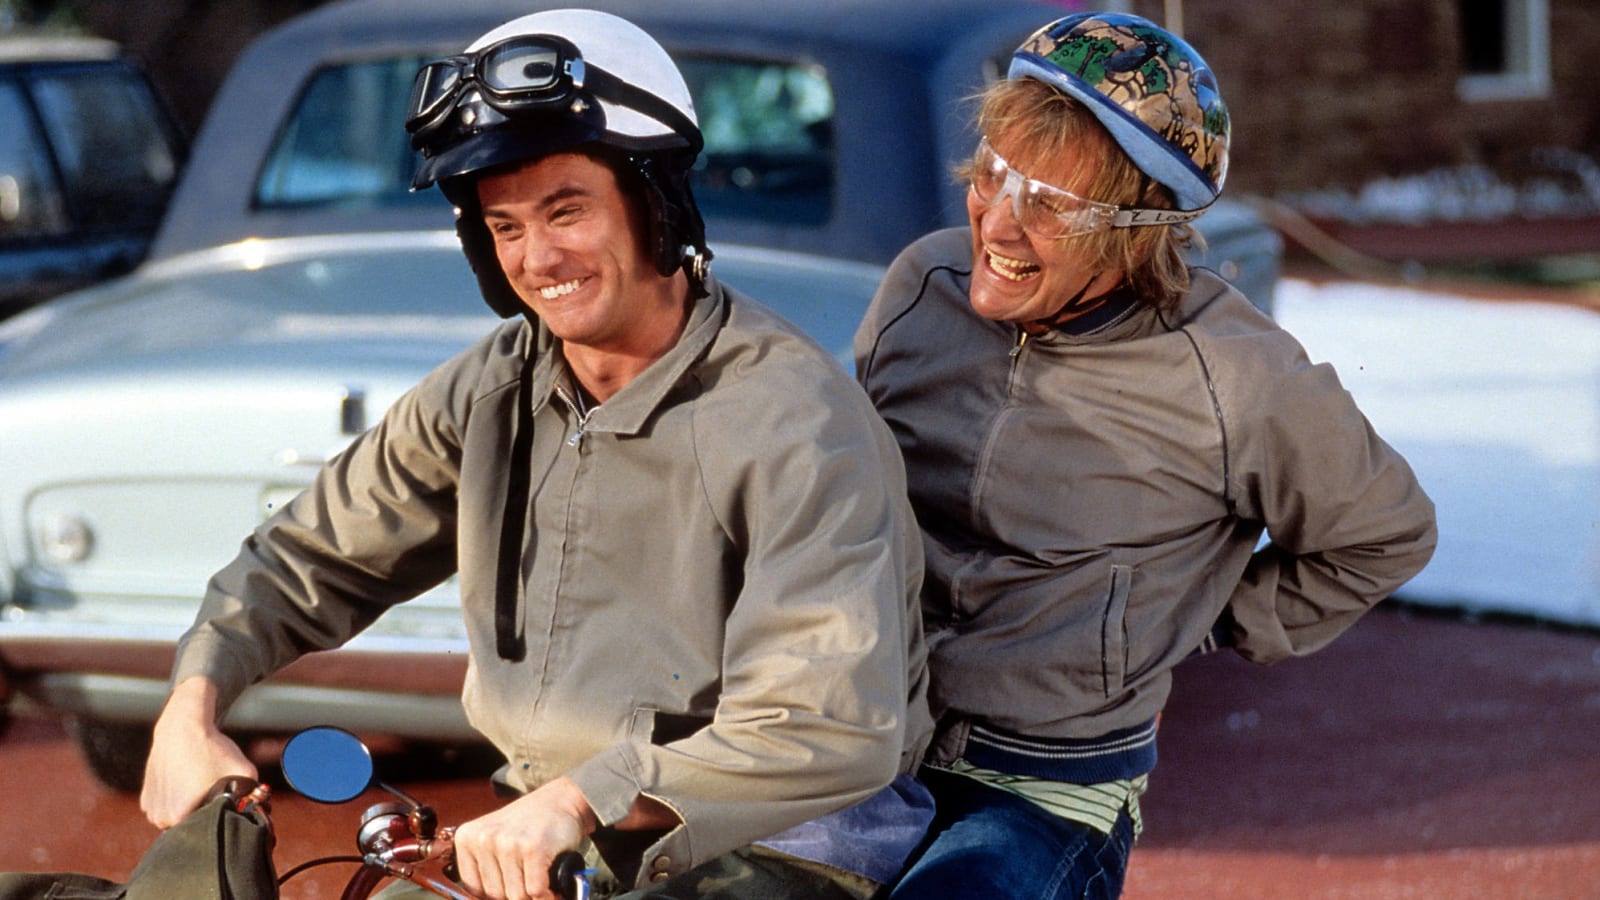 The 20 best road trip movies